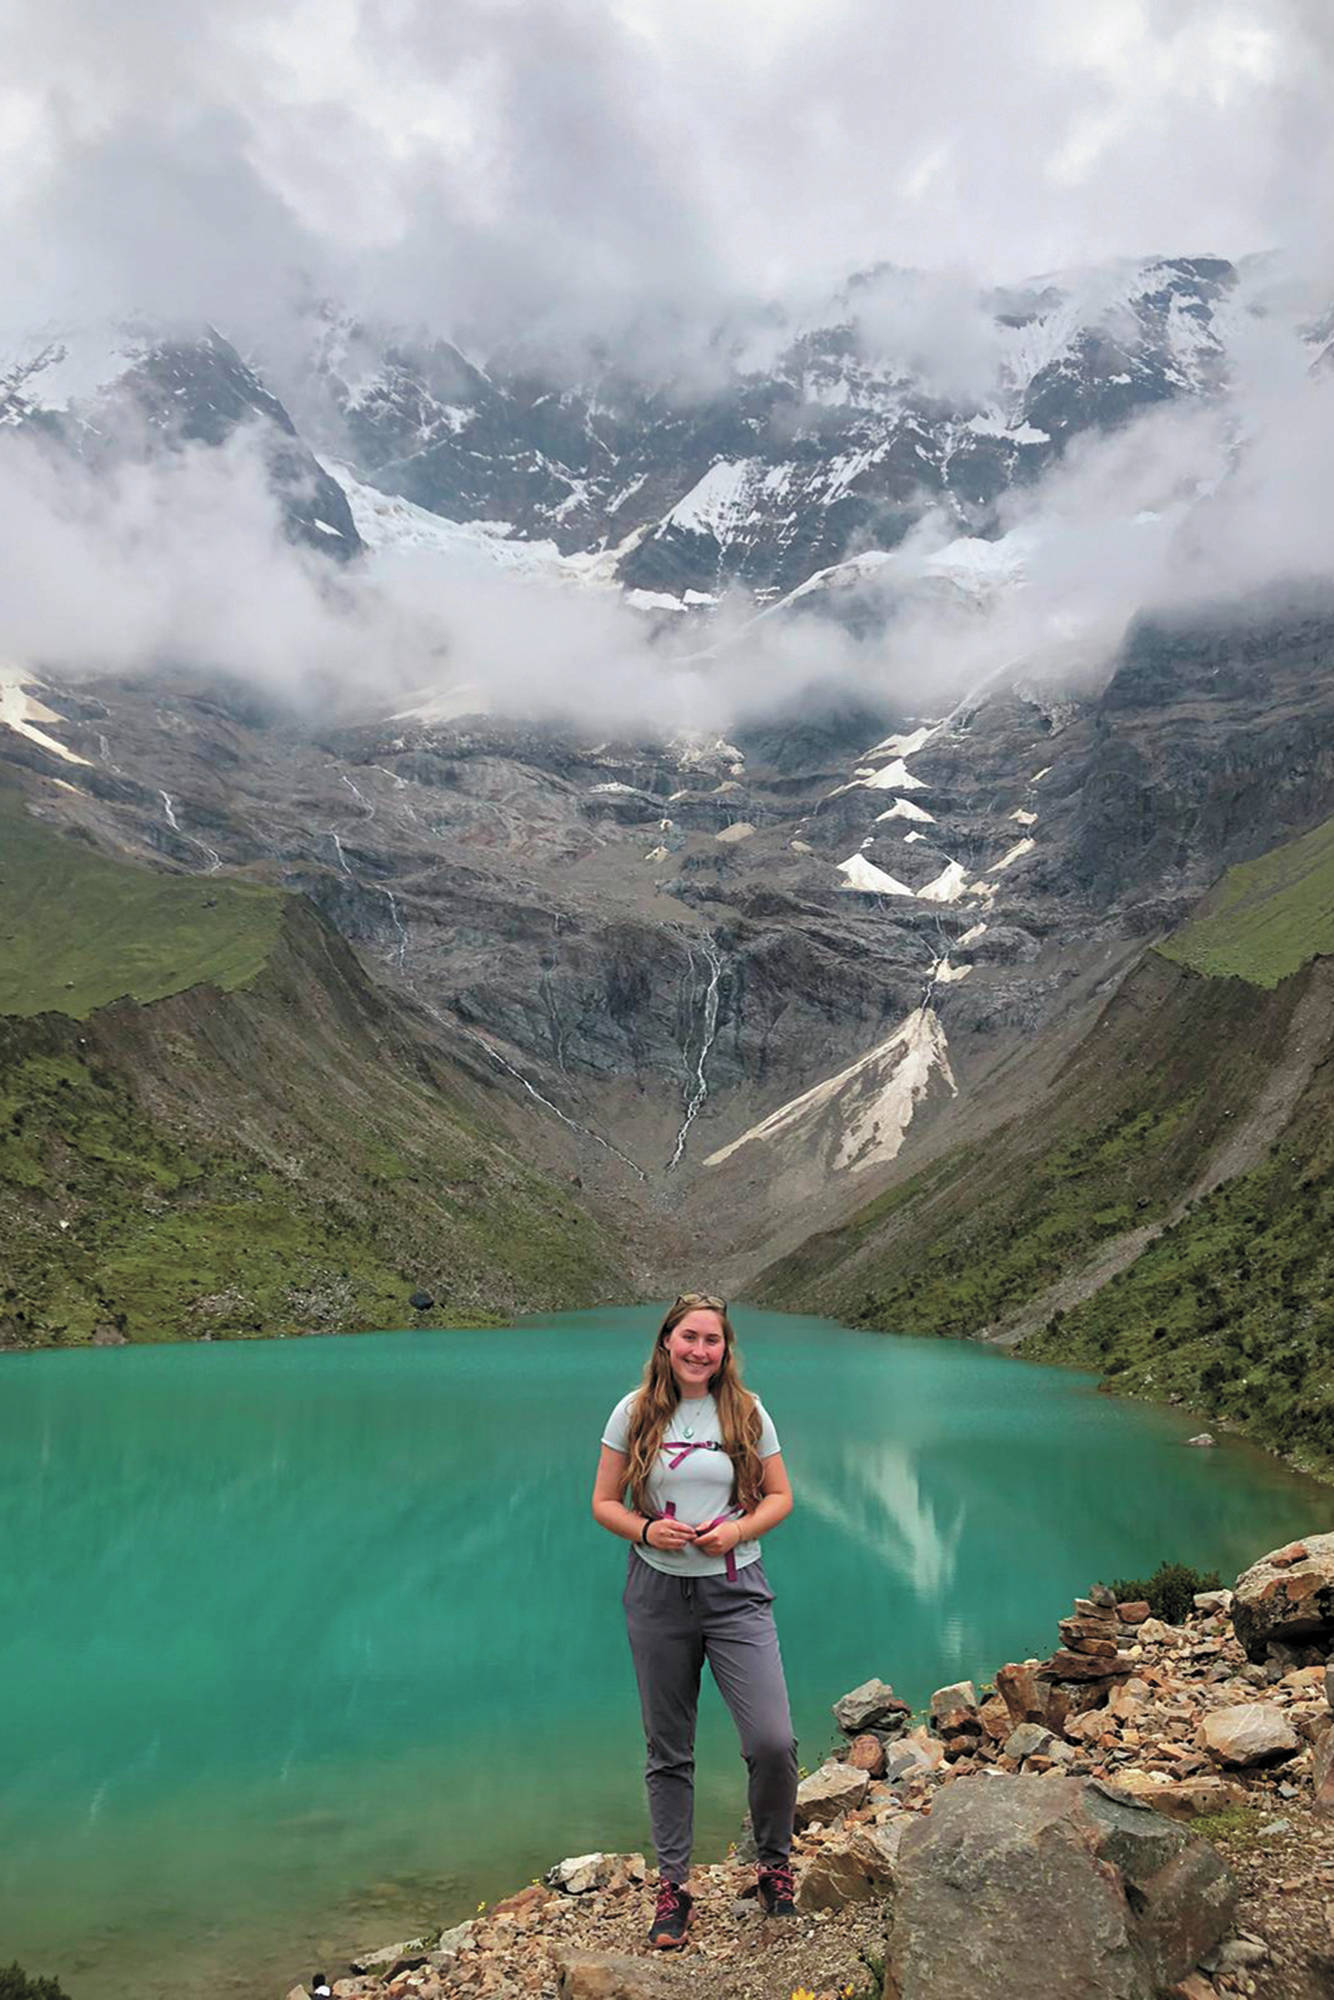 Photo courtesy Brenna McCarron                                Brenna McCarron, a Homer High School graduate stuck in Peru after the country closed its borders to stem the spread of the novel coronavirus, visits Humantay Lake in Peru. She is one of about 19 Alaskans stranded in the country.